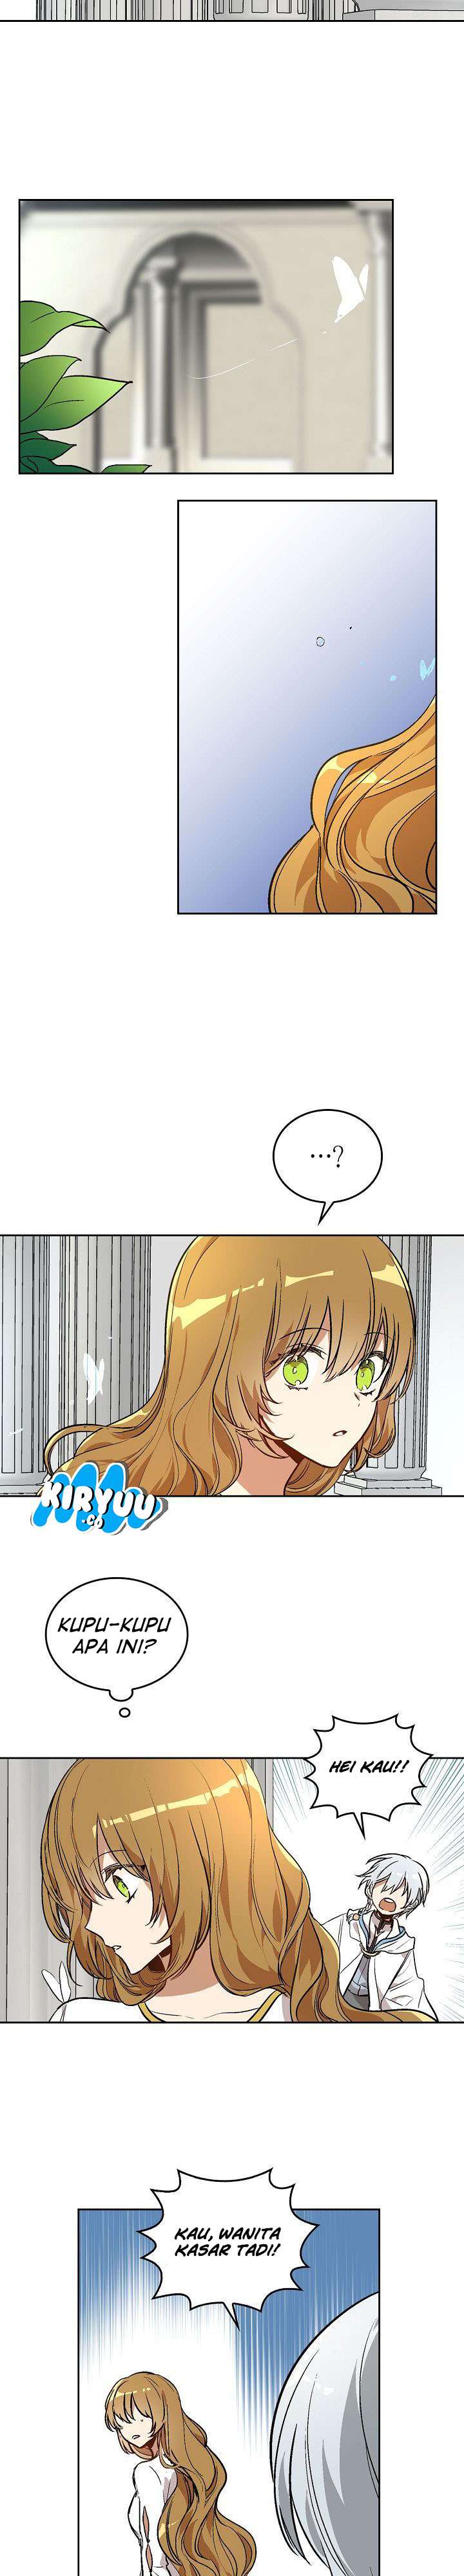 The Reason Why Raeliana Ended Up at the Duke’s Mansion Chapter 38 Bahasa Indonesia